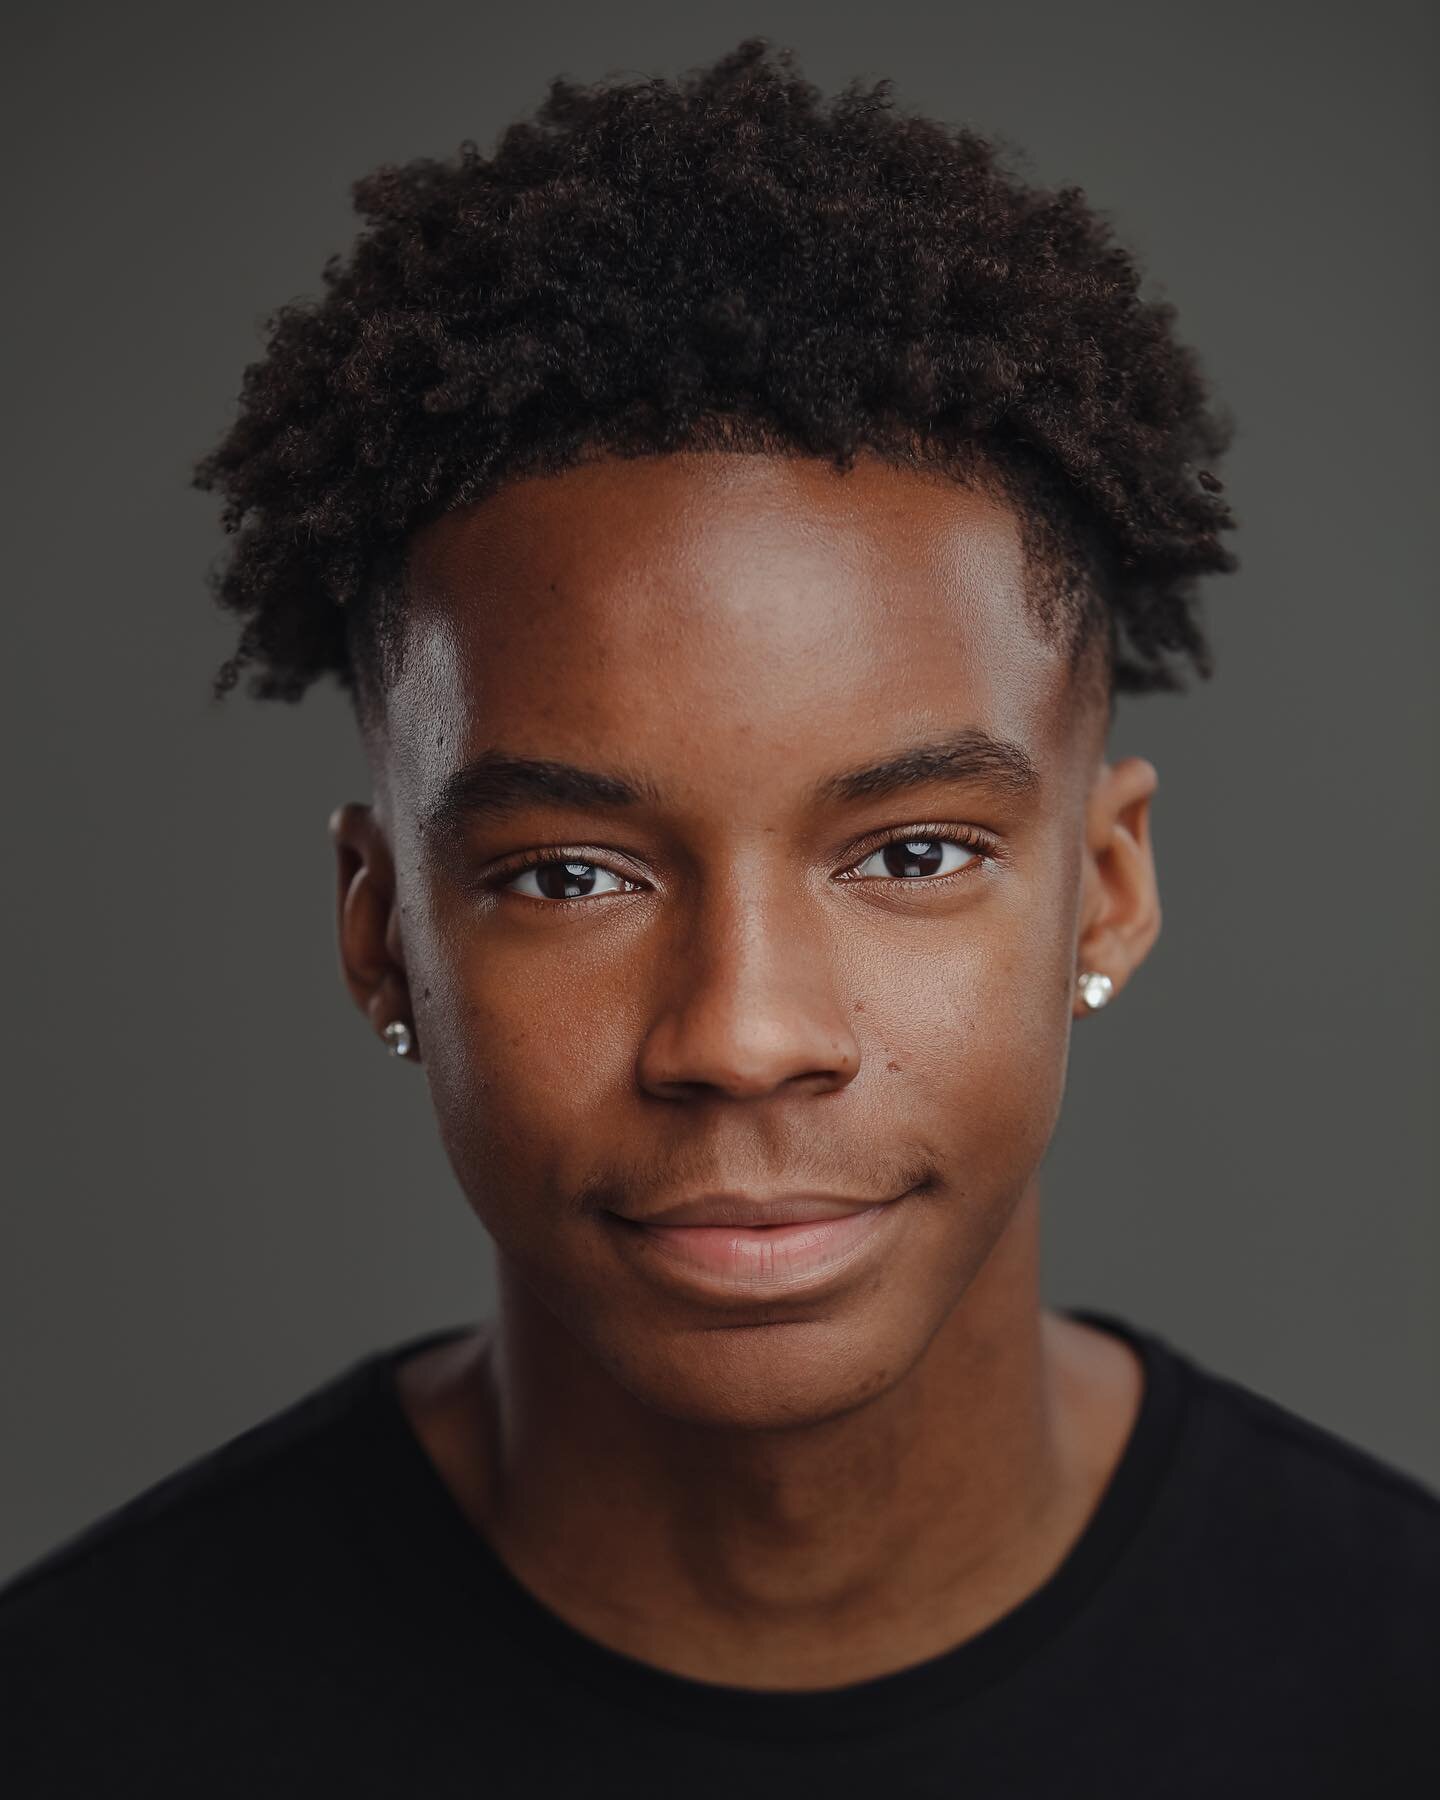 Thank you Kyler for having your headshots taken with Actors Headshots London ⚡️